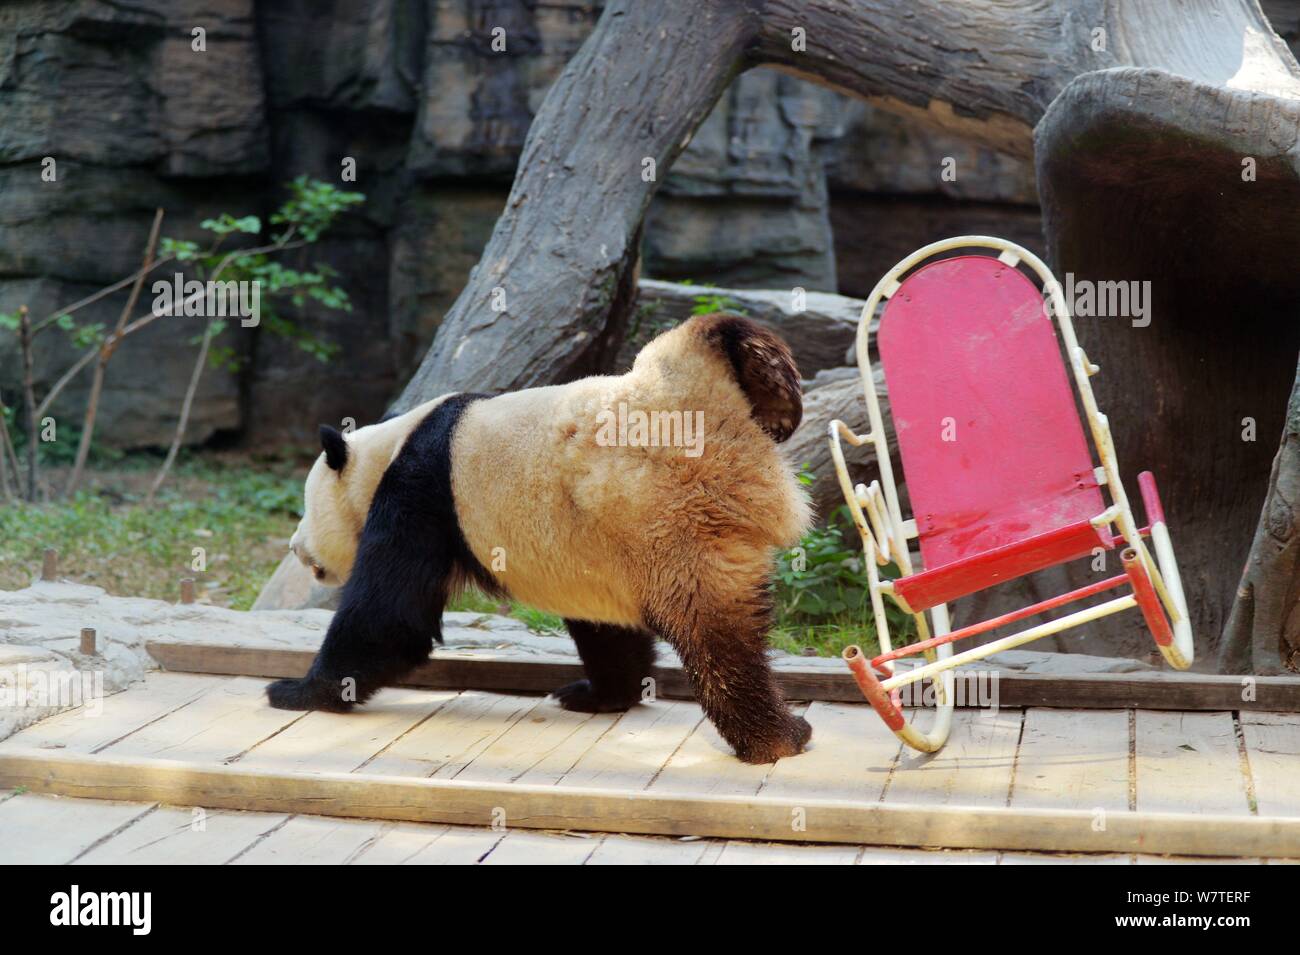 A giant panda falls down from a rocking chair at Beijing Zoo in Beijing, China, 17 May 2017. Stock Photo